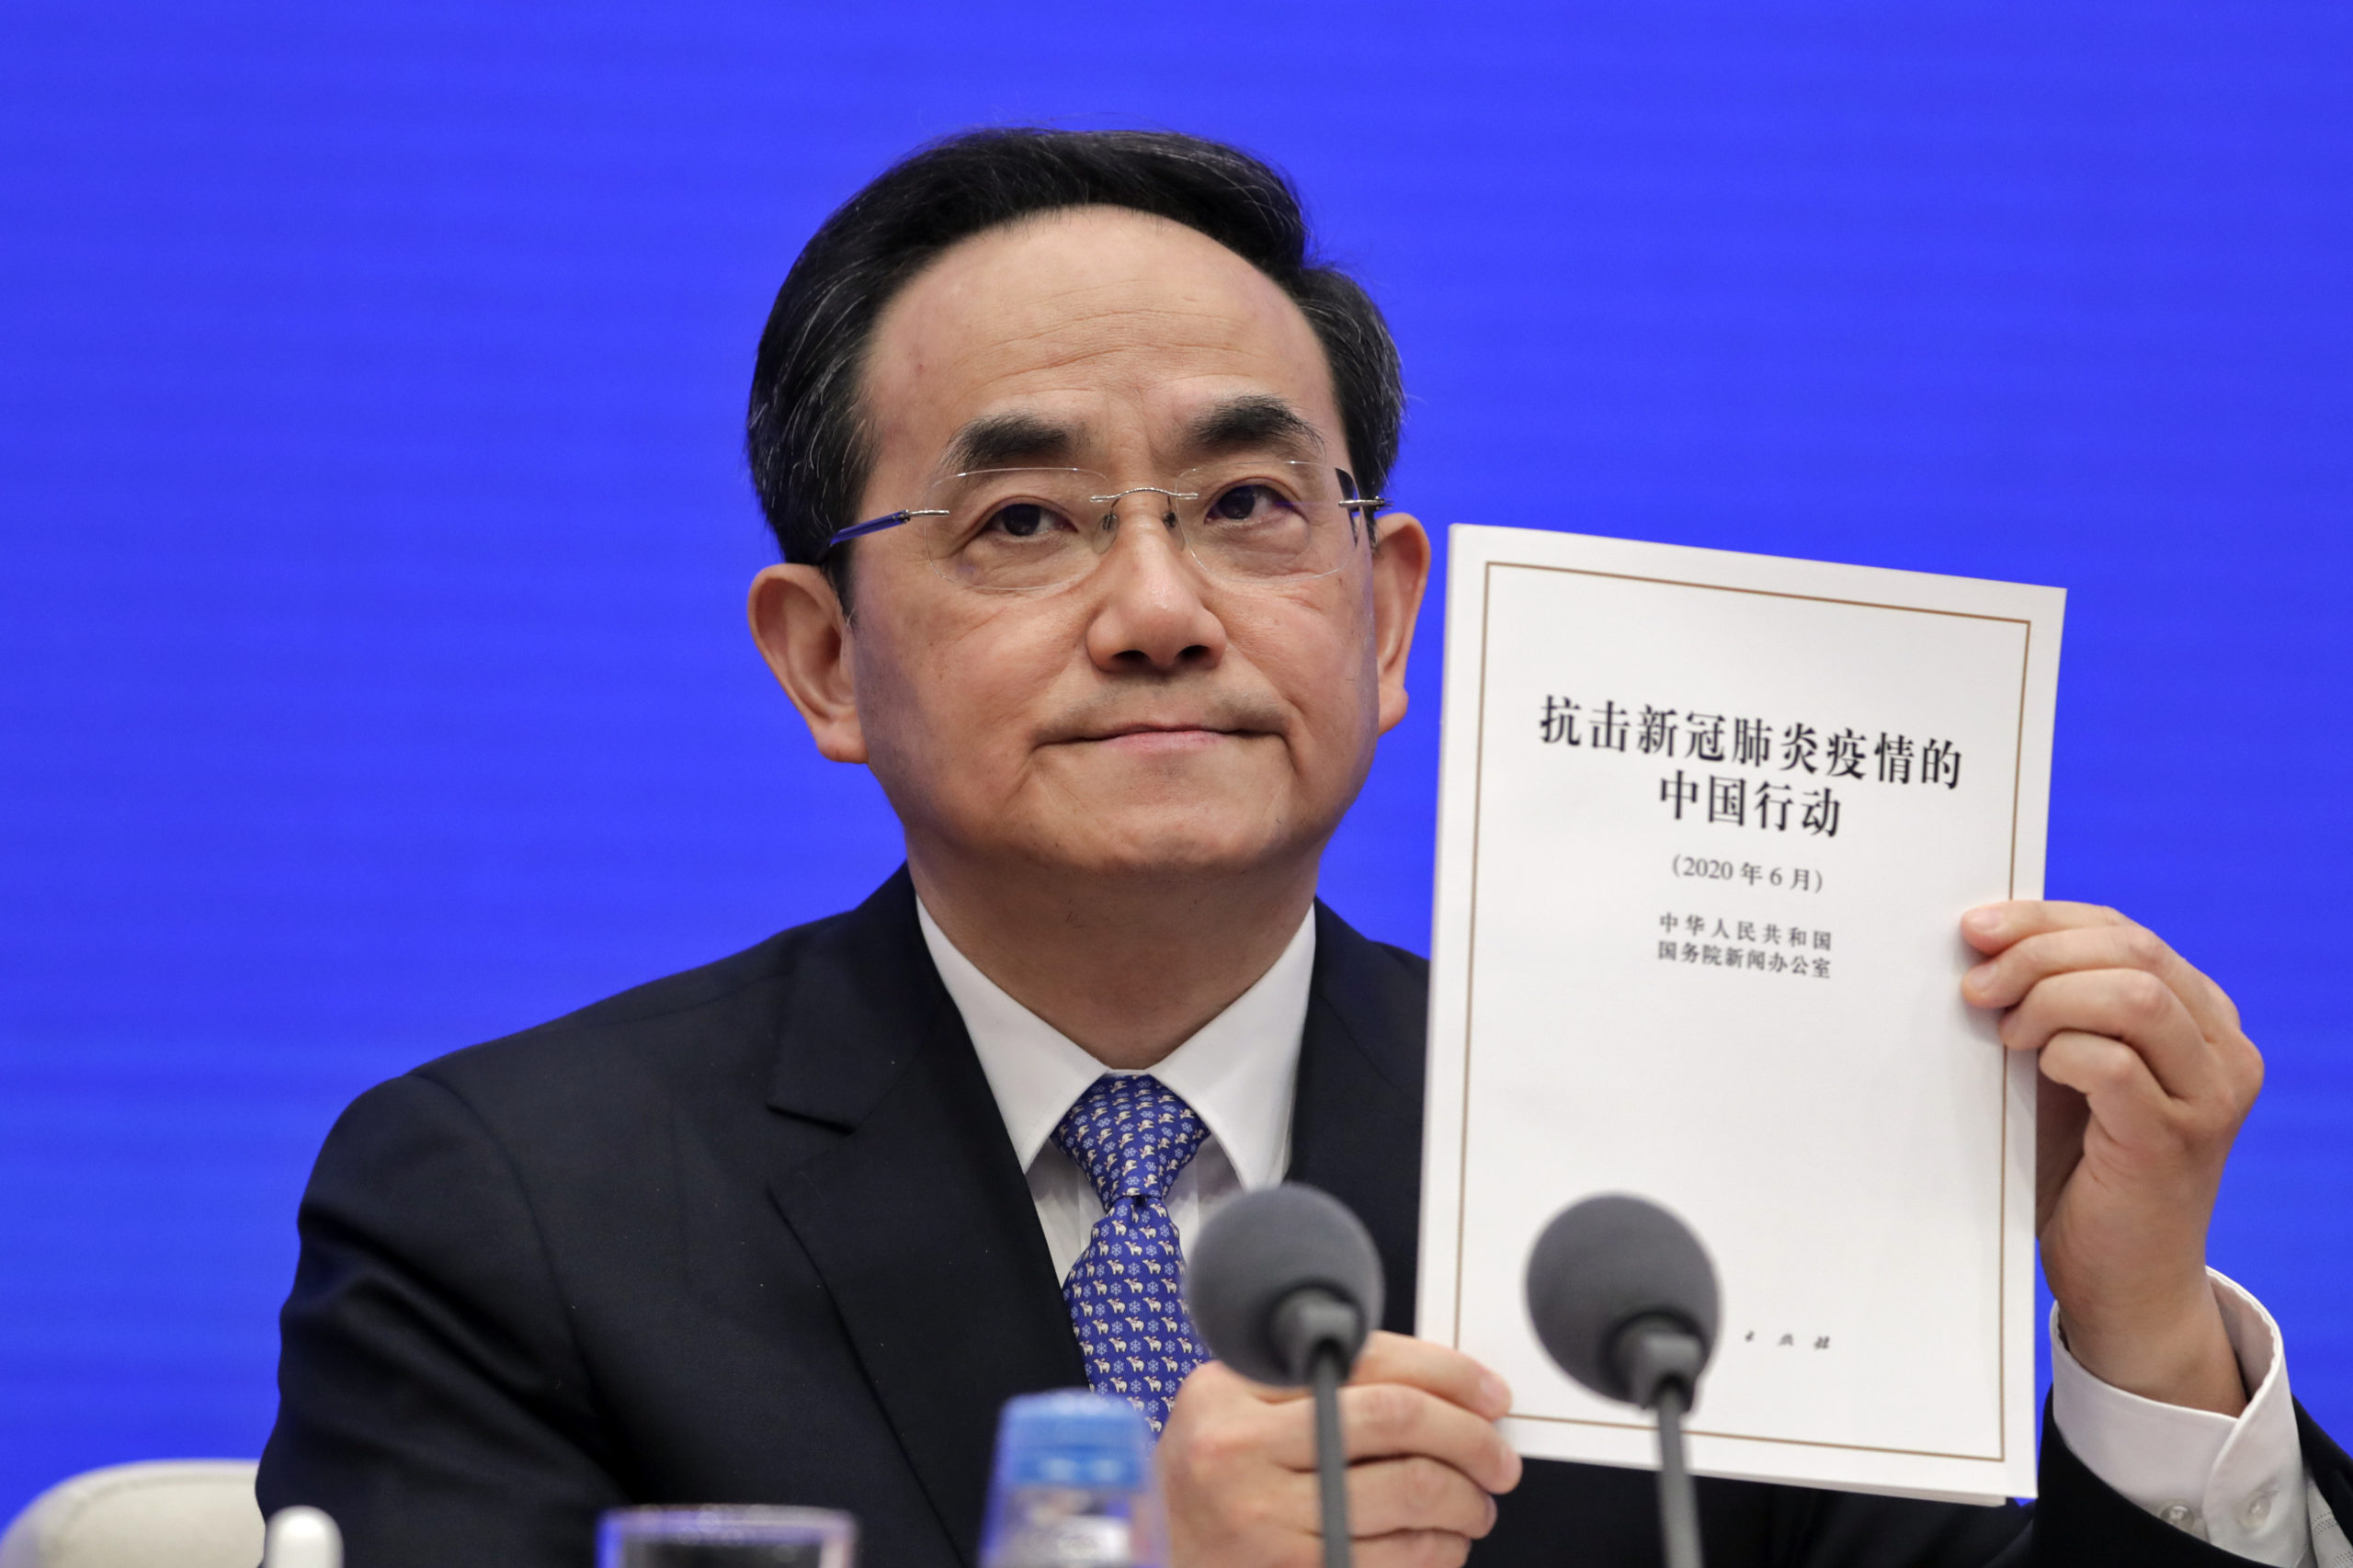 Xu Lin, Vice head of the Publicity Department of Communist Party shows a copy of the white paper on fighting COVID-19 China in action during a press conference at the State Council Information Office in Beijing, Sunday, June 7, 2020. Senior Chinese health officials defended their country's response to the new coronavirus pandemic, saying they provided information in a timely and transparent manner. (AP Photo/Andy Wong)